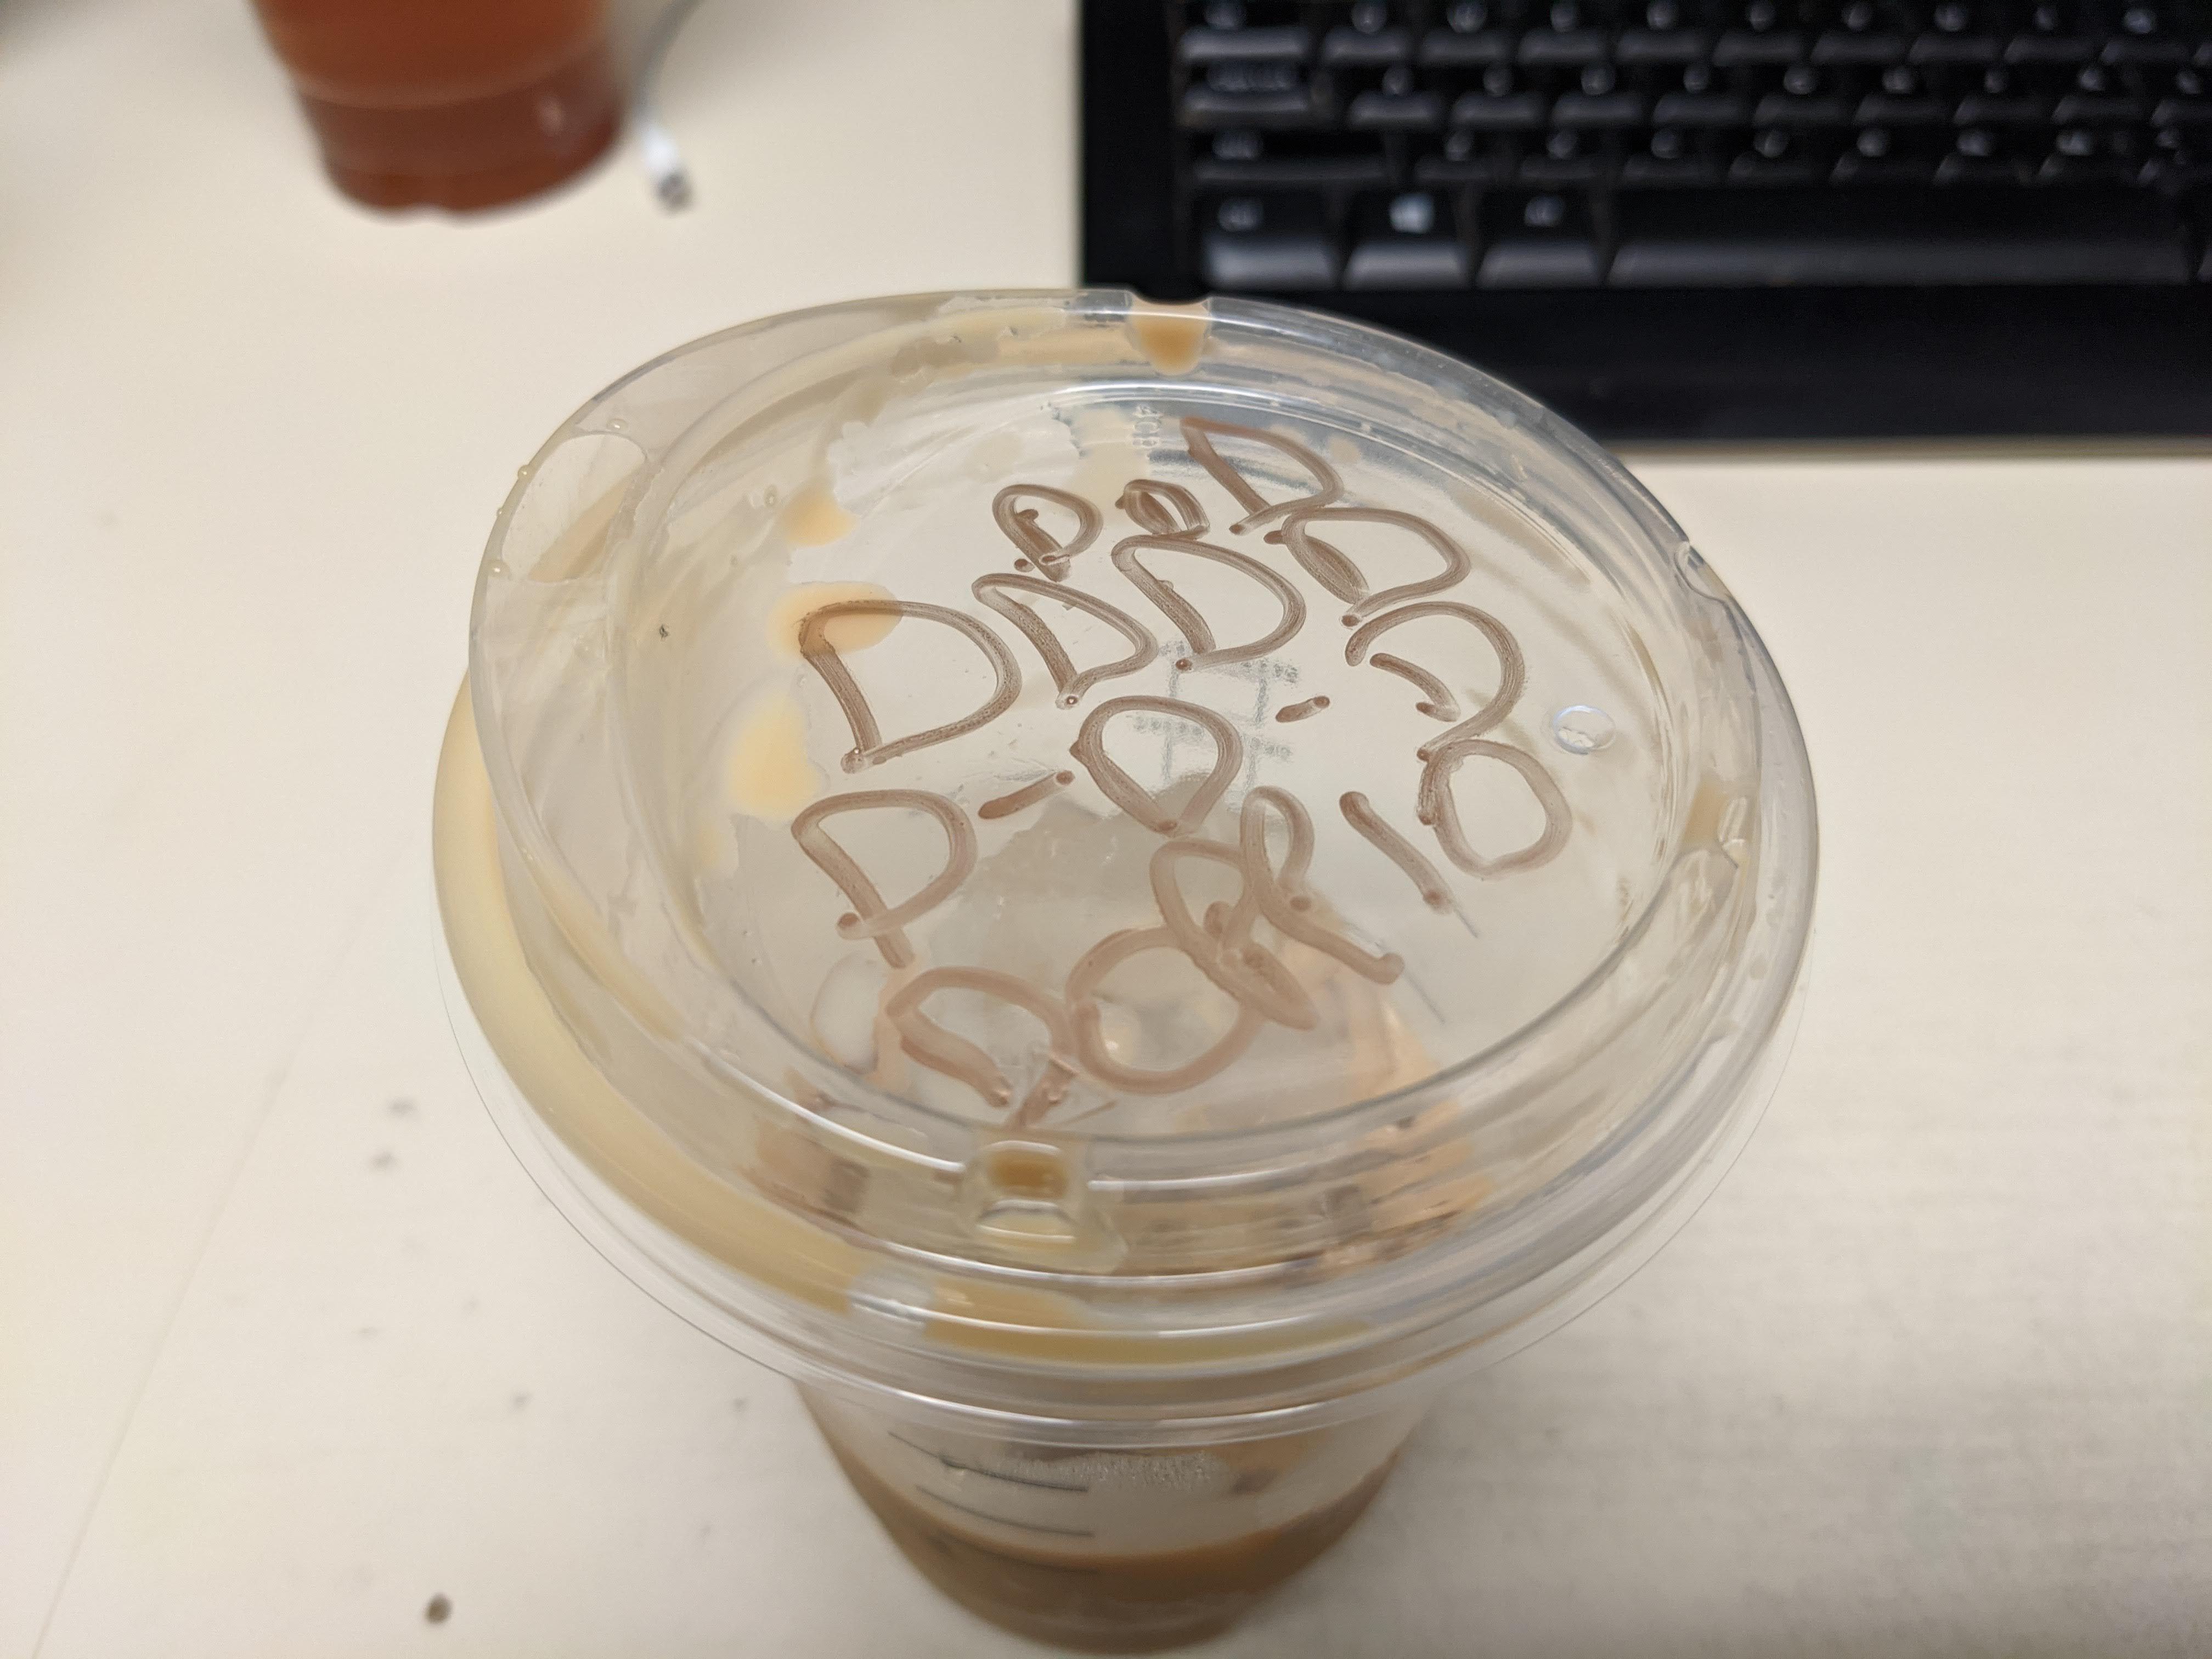 The top of a plastic iced cup that says D D D D D D DOPPIO